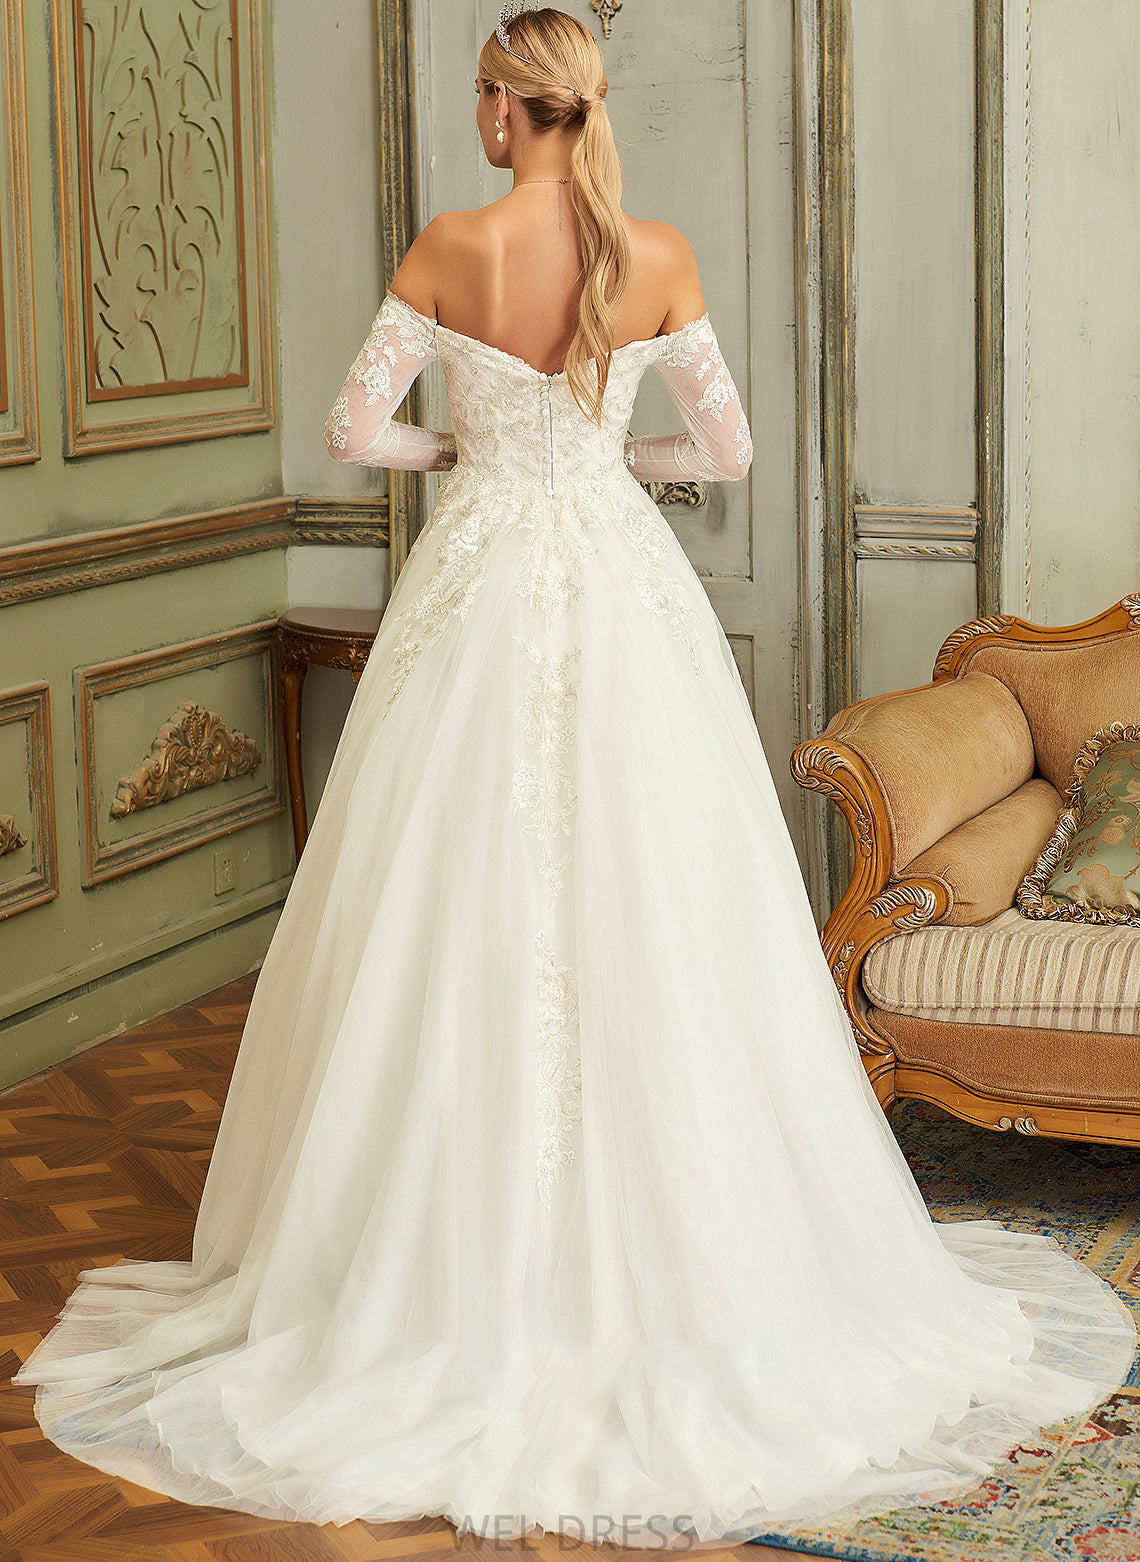 Dress Lace Off-the-Shoulder With Sarahi Ball-Gown/Princess Wedding Train Tulle Lace Wedding Dresses Sweep